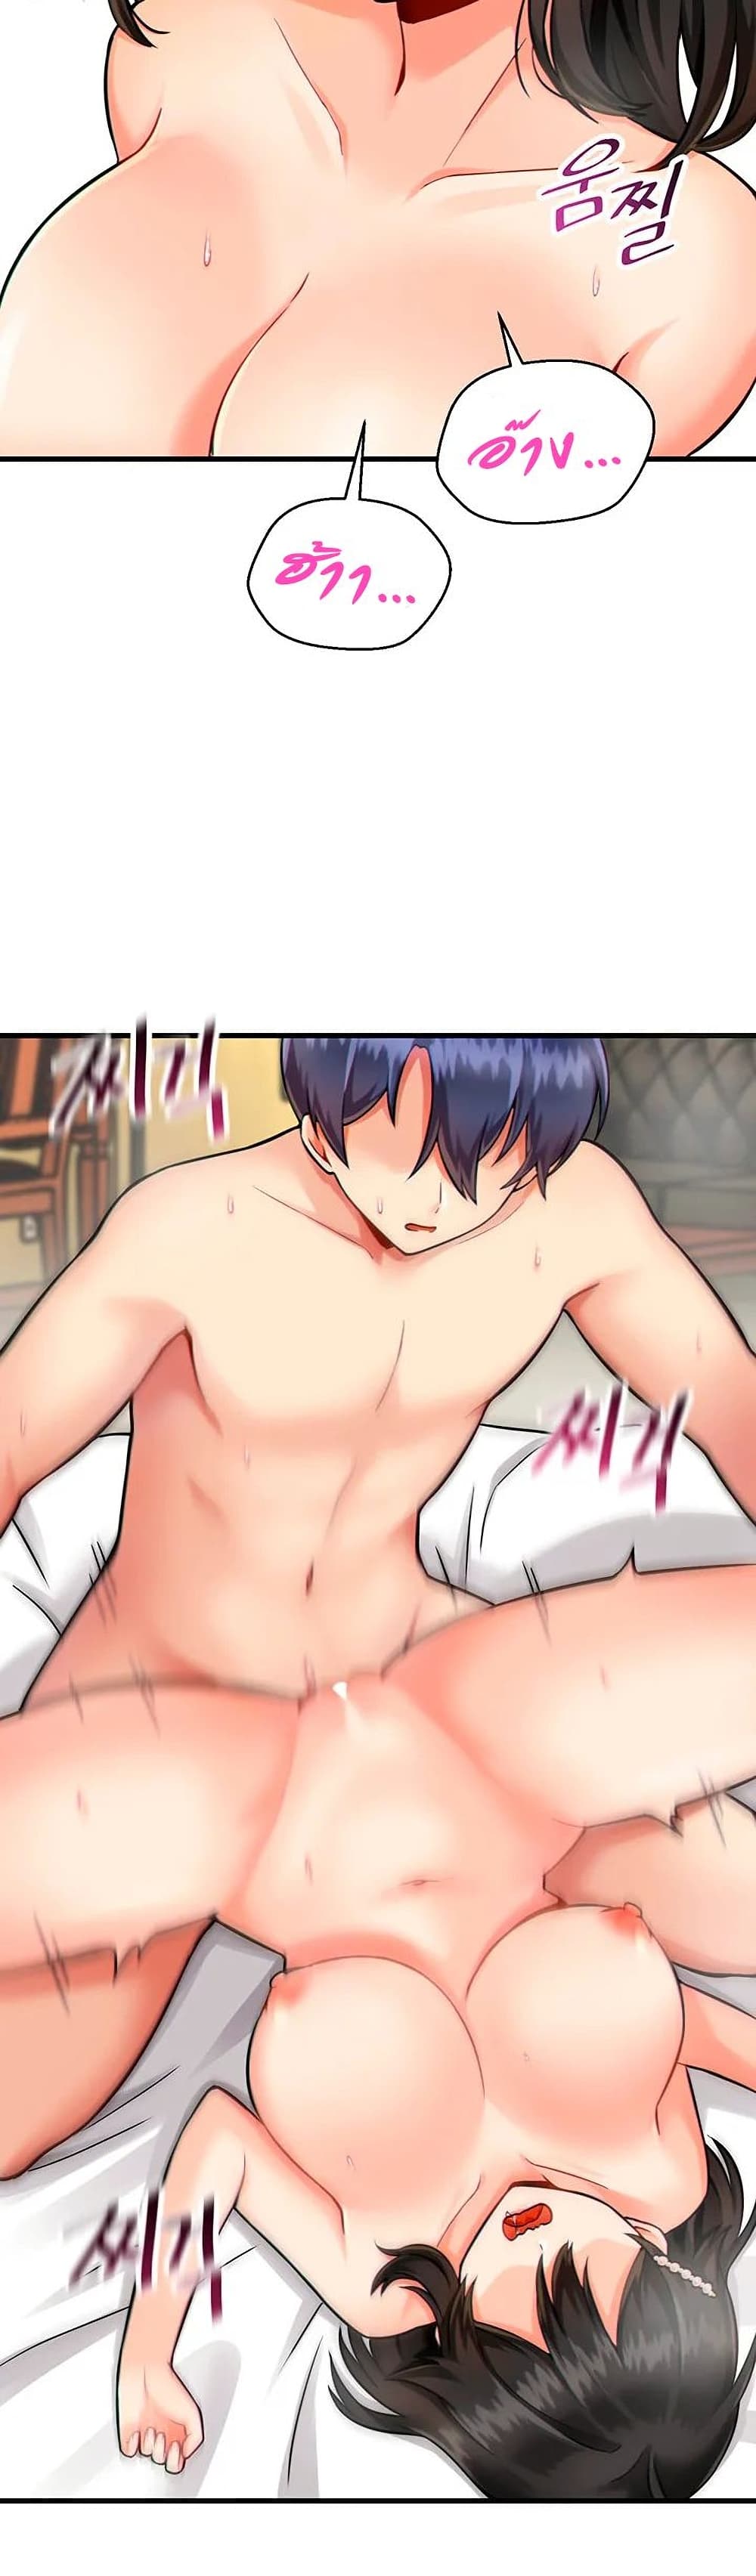 Trapped in the Academy’s Eroge 11 (6)